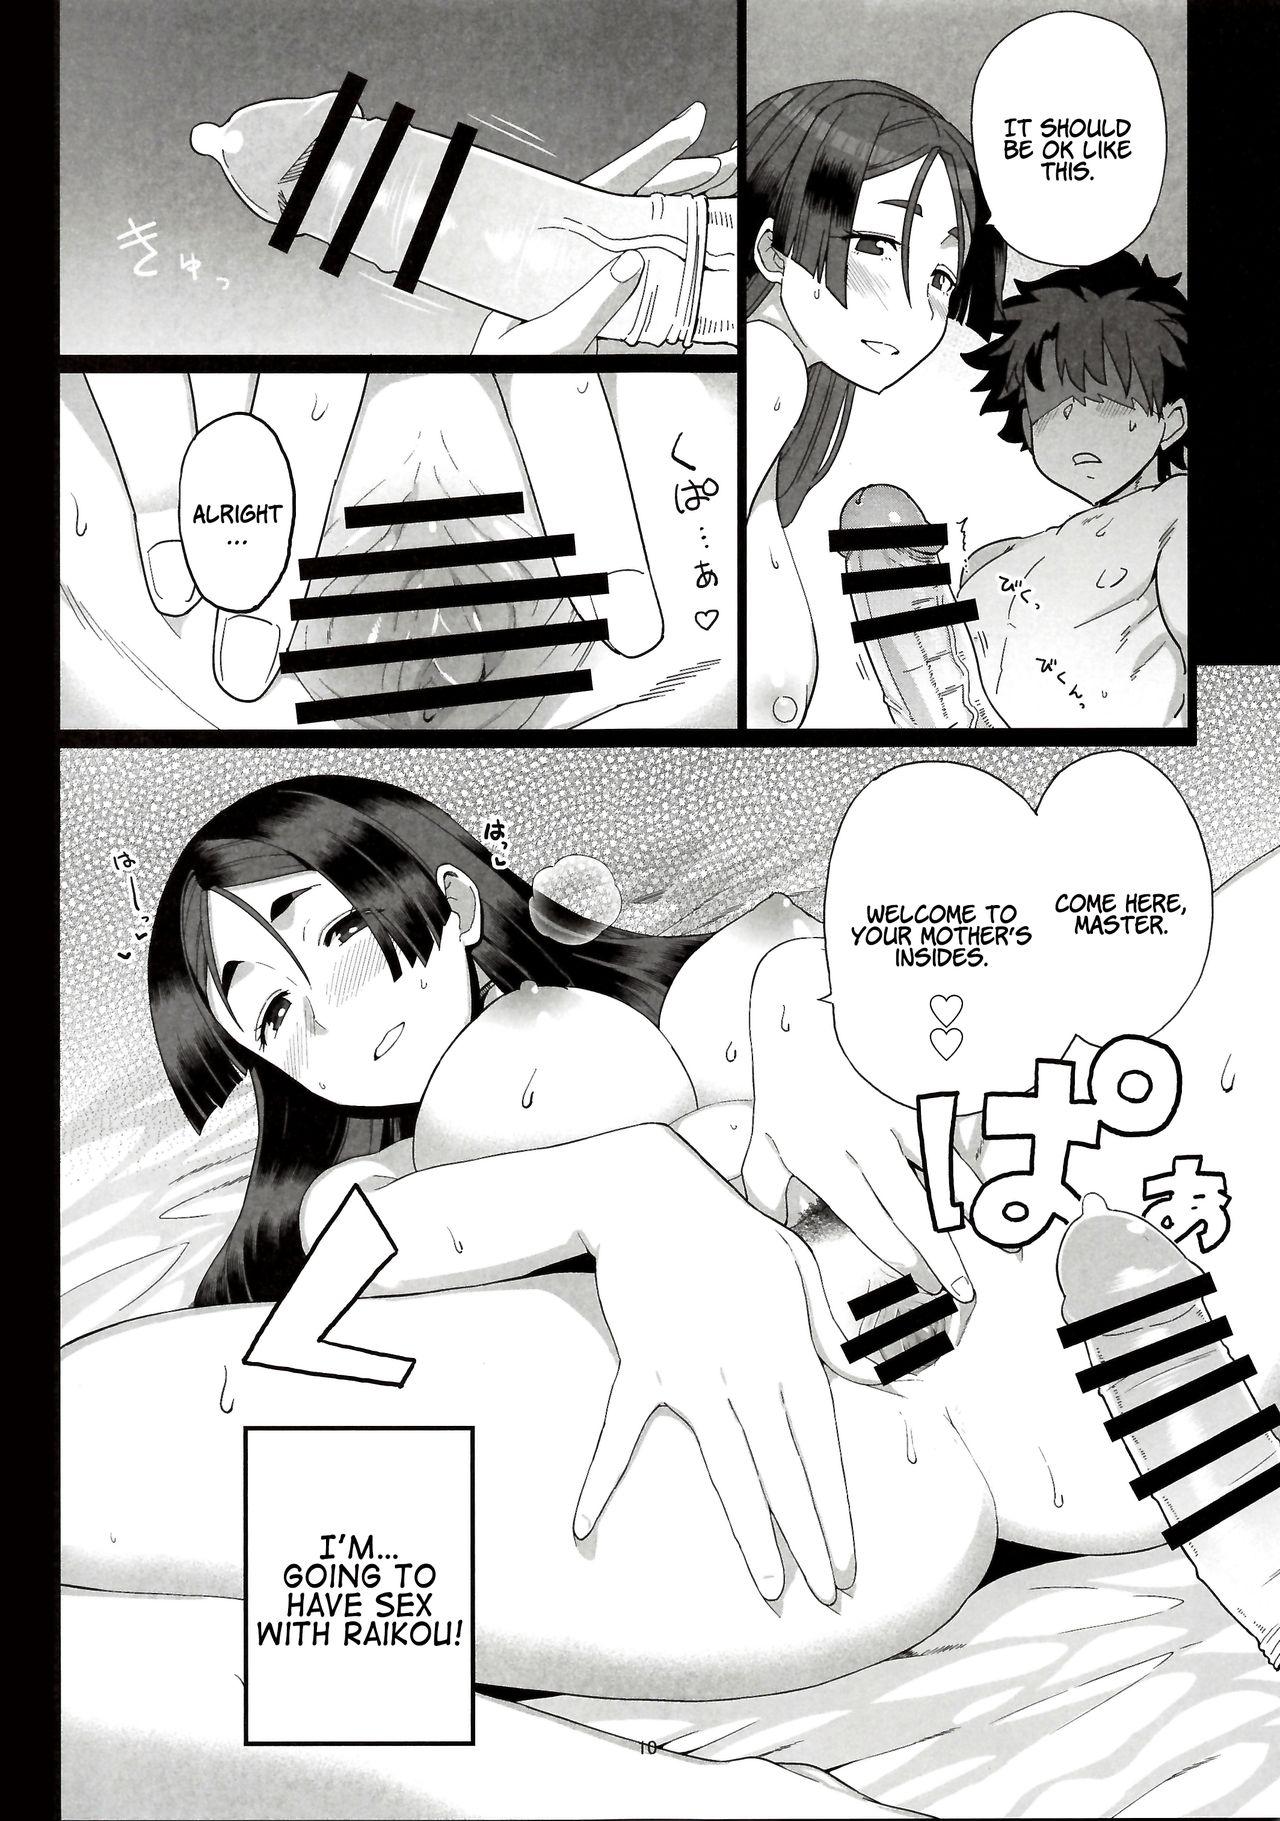 Cum On Face Raikou Mama to Ecchi Shinai to Derarenai Heya | A Room You Can’t Leave if You Don’t Have Sex with Raikou Mama - Fate grand order Police - Page 12